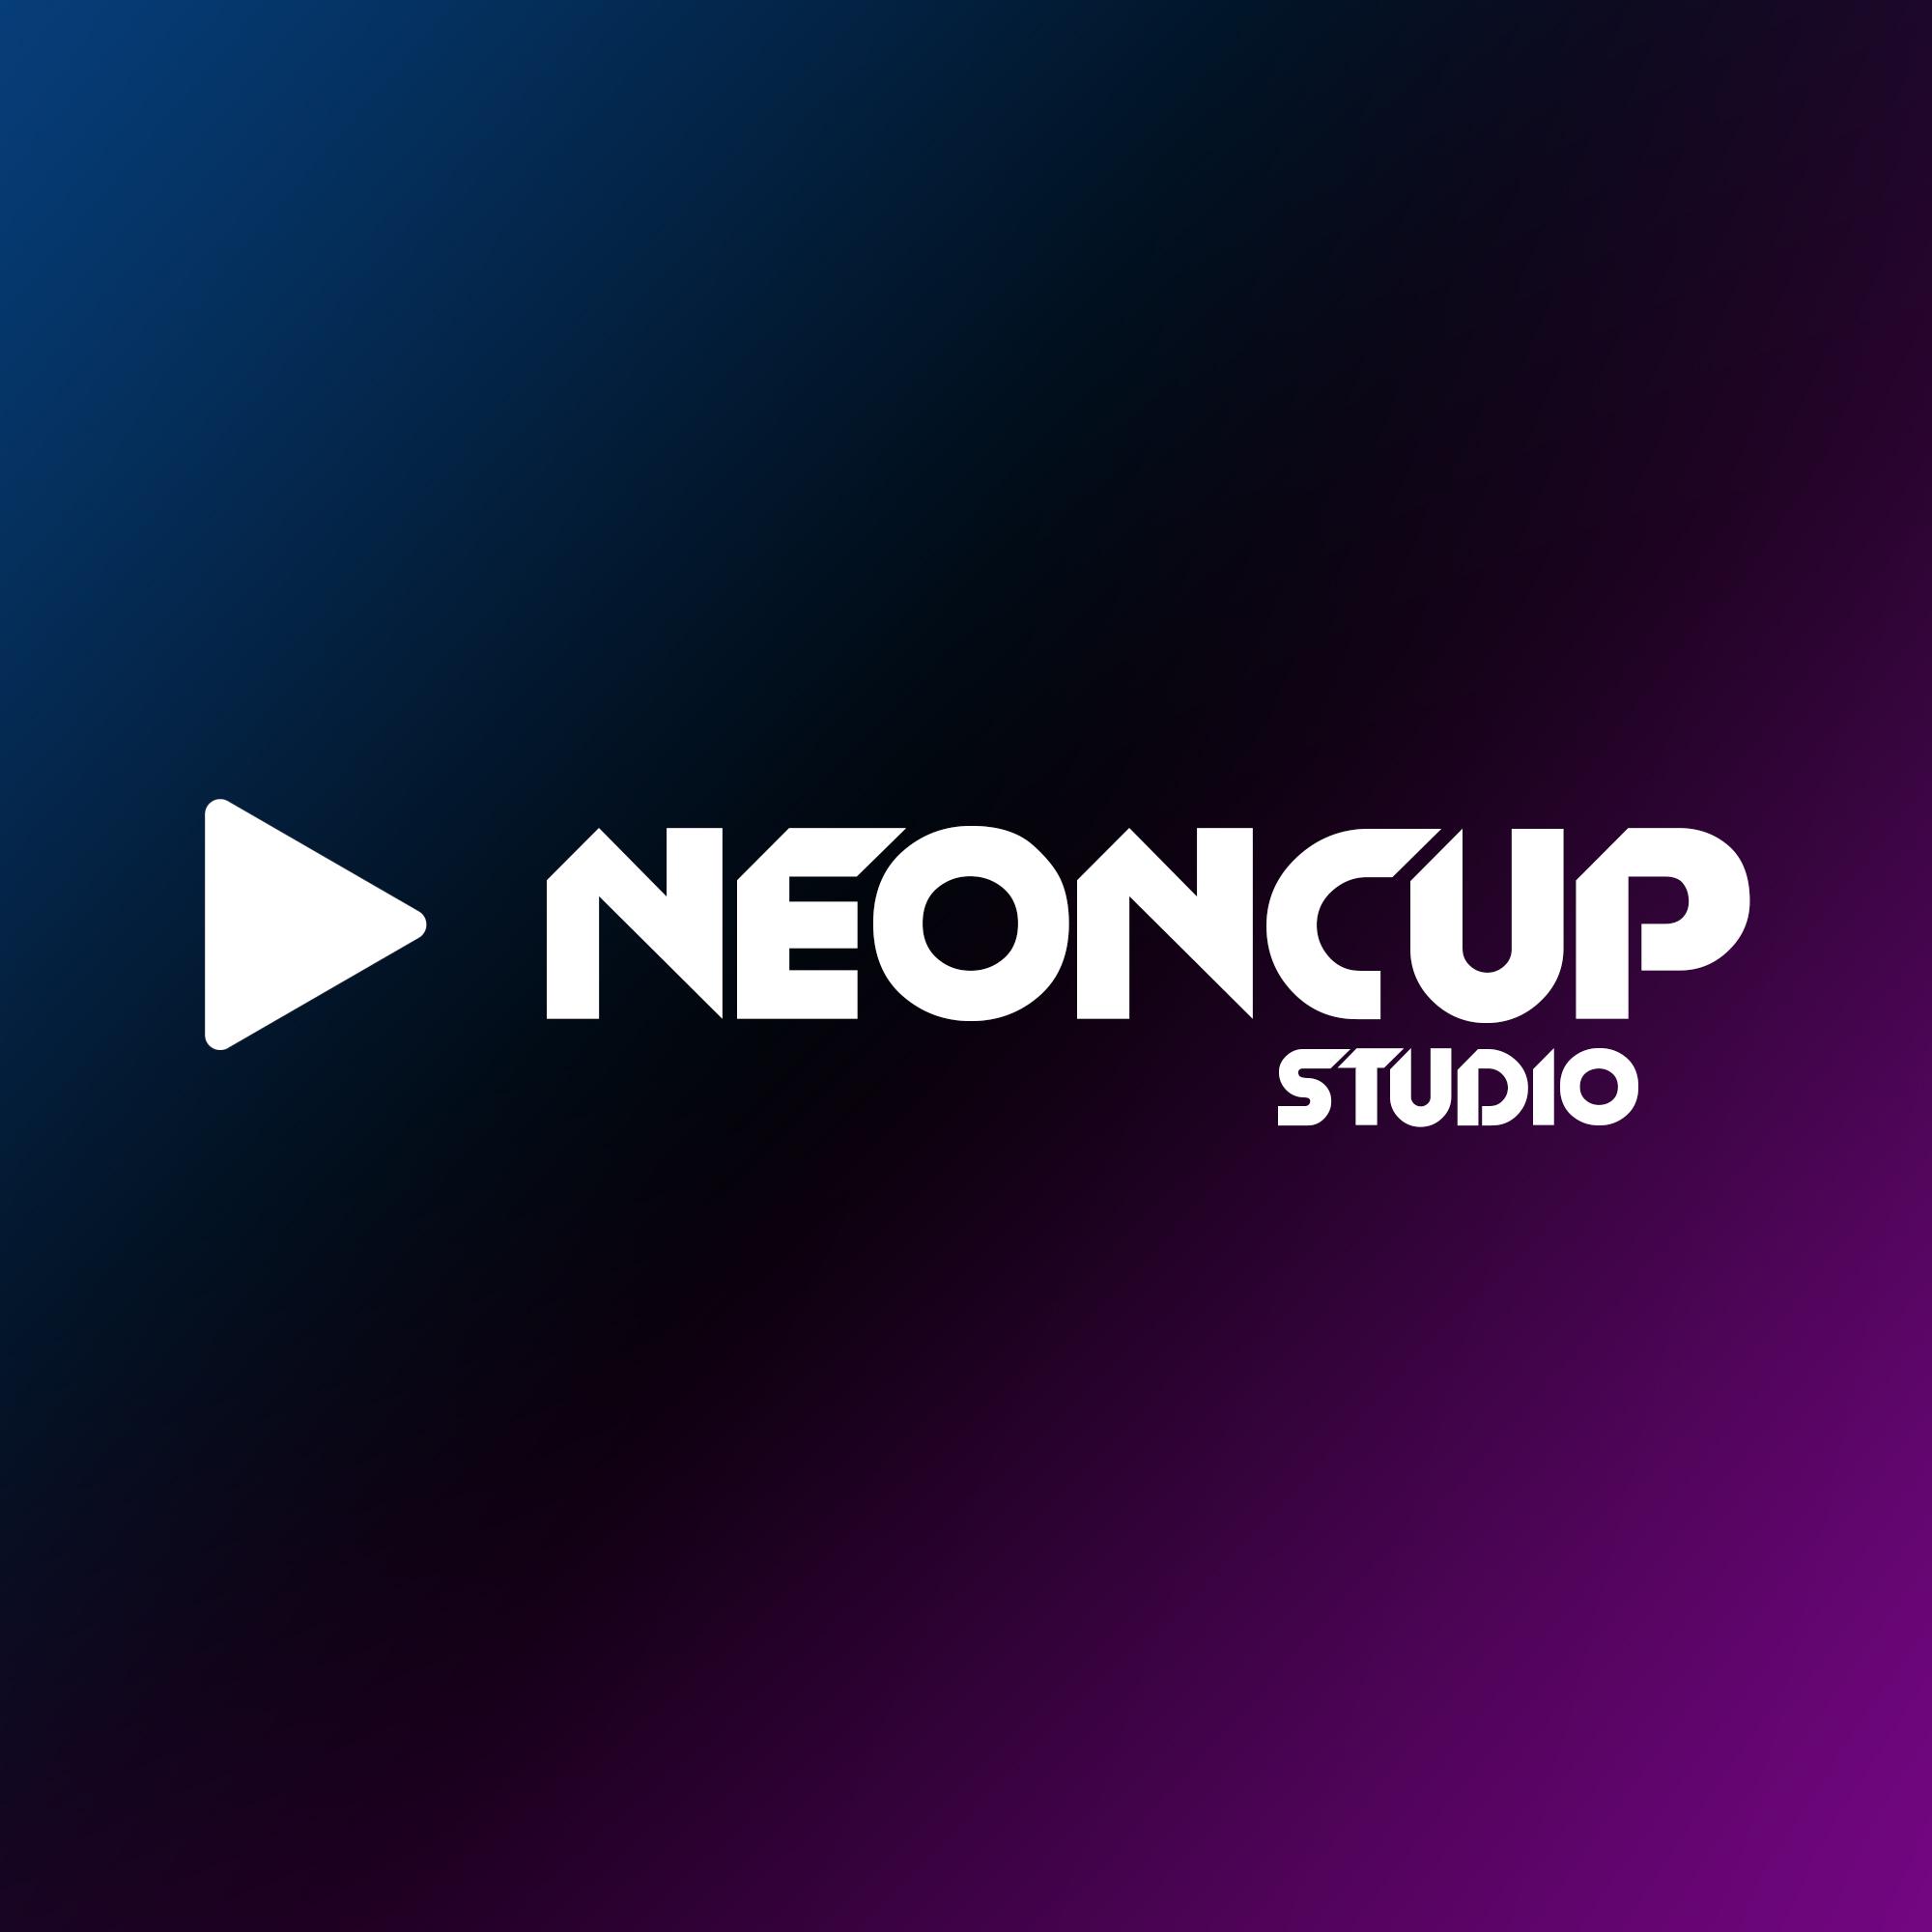 NeonCup Studio profile on Qualified.One